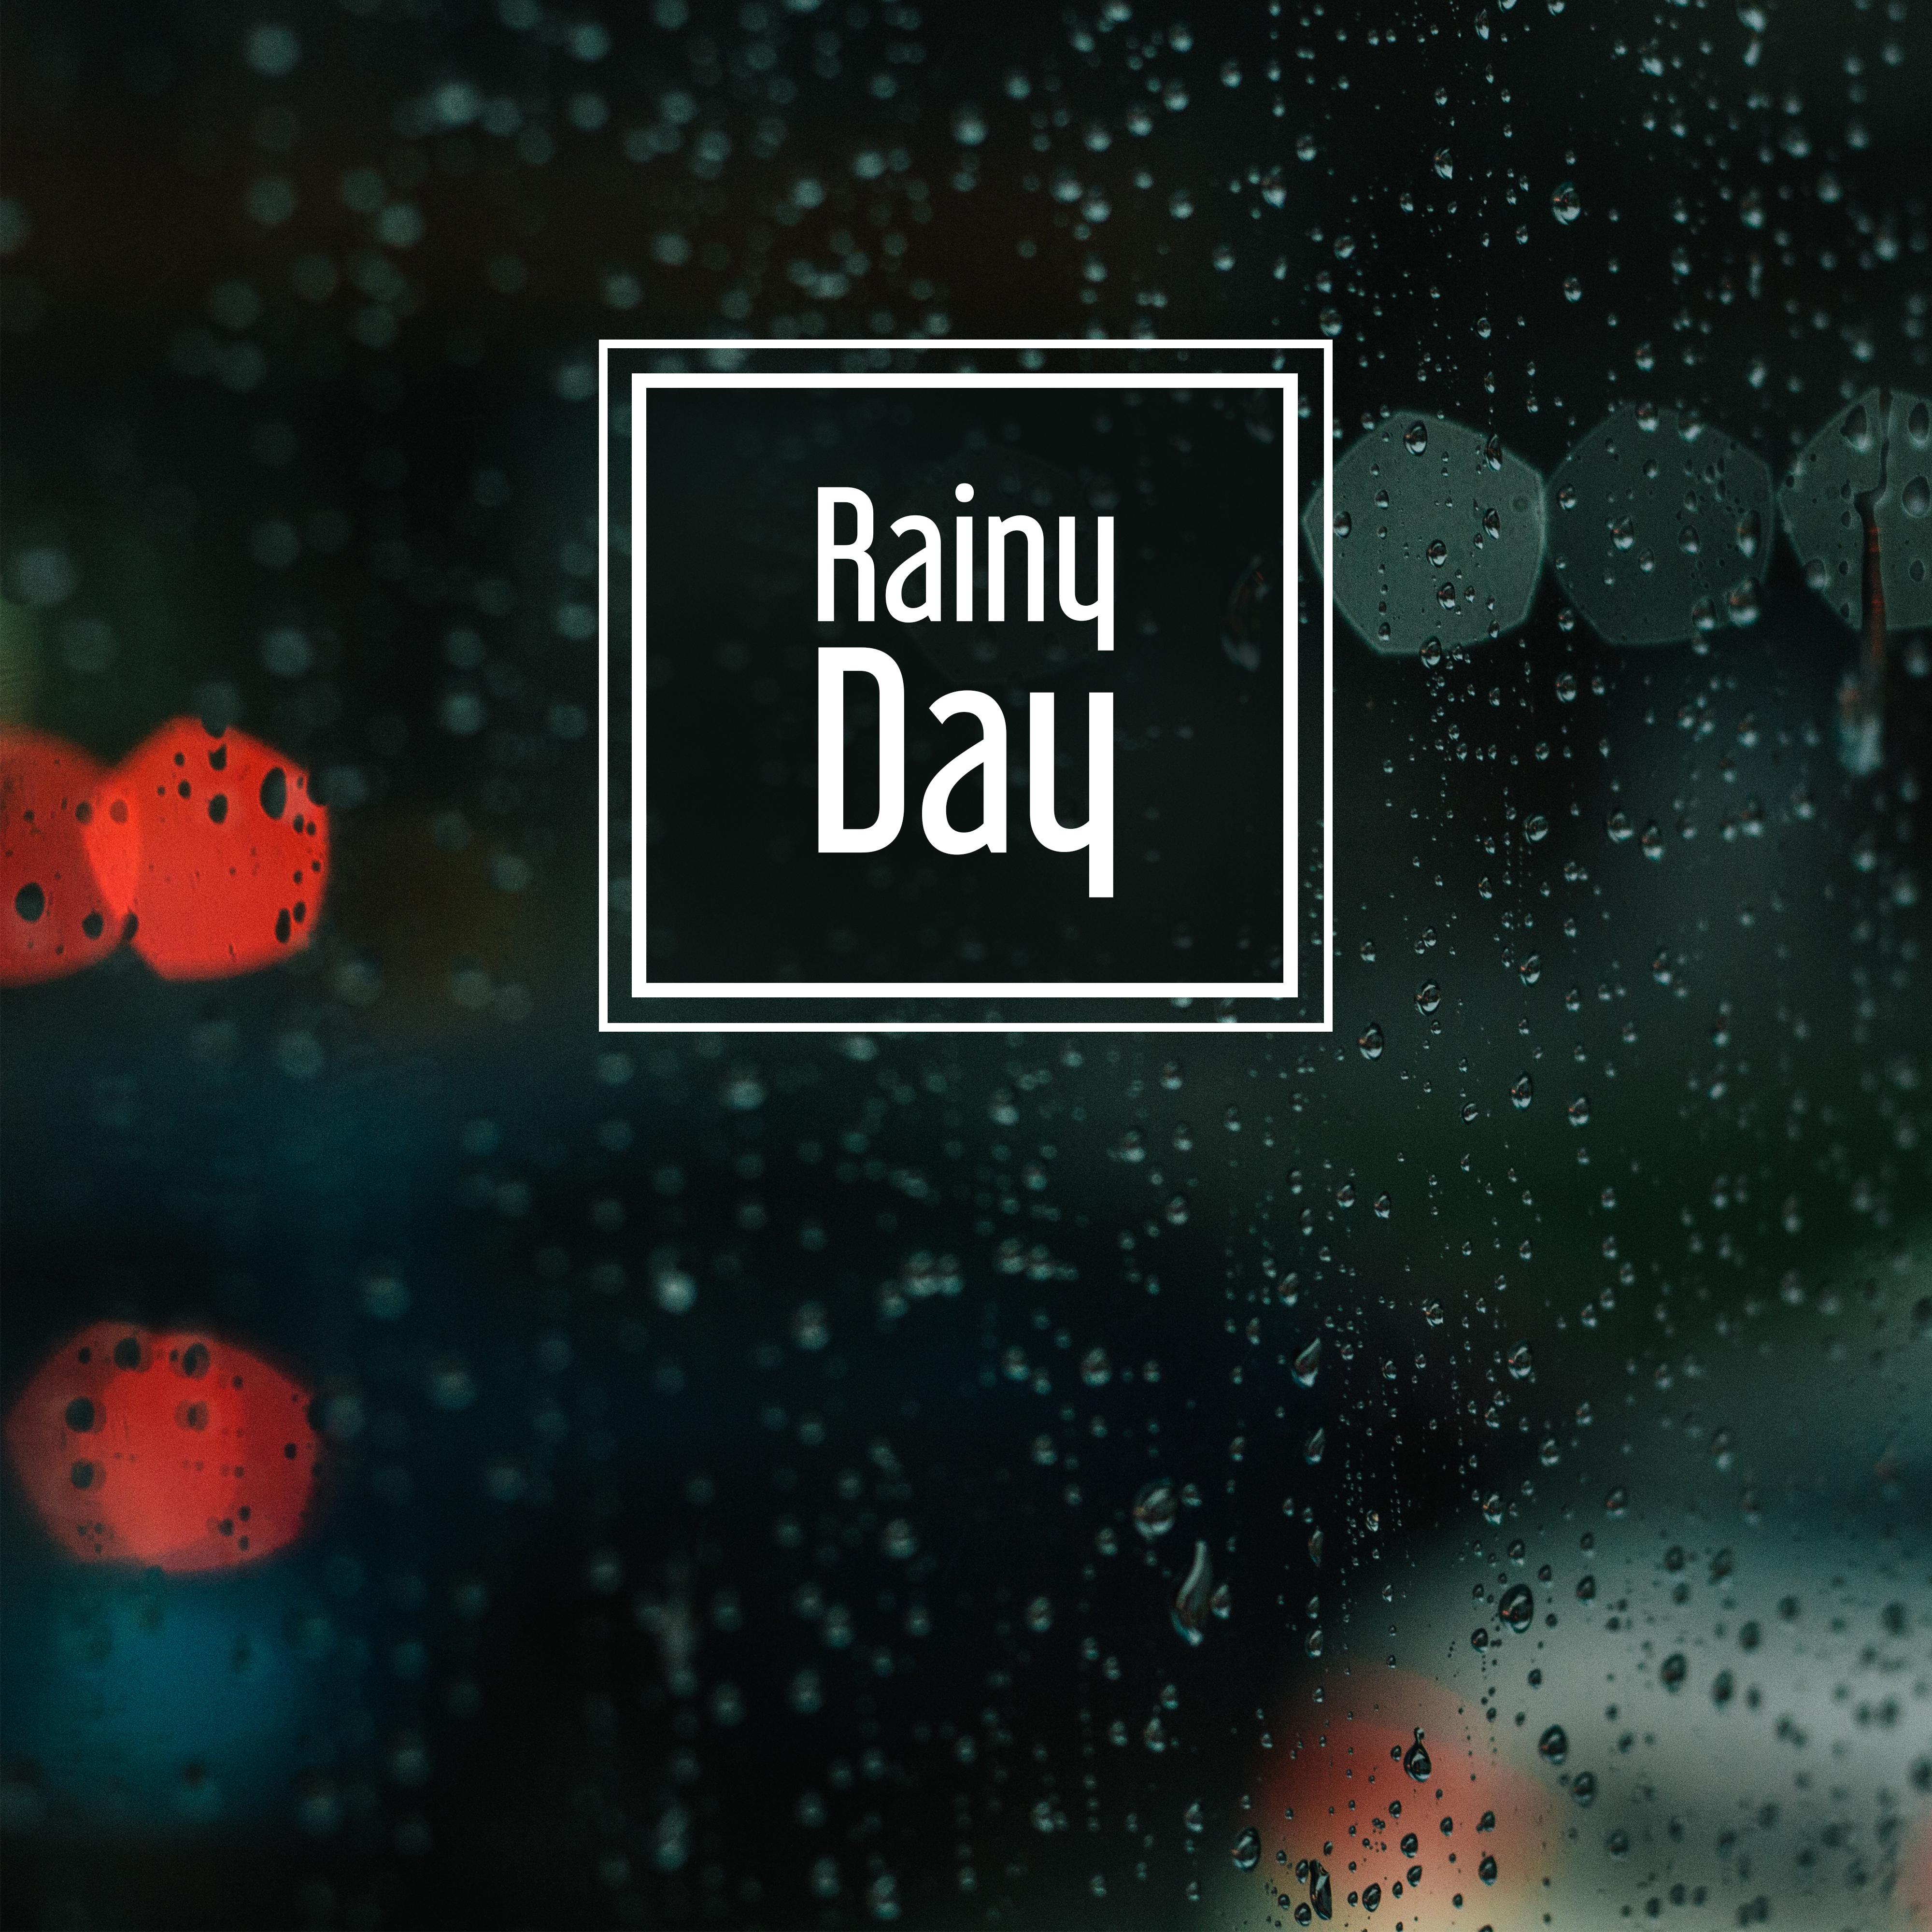 Rainy Day – Music for Relaxation, Nature Sounds, Deep Sleep, Soothing Rain, Calmness, Calming Water, Guitar Music